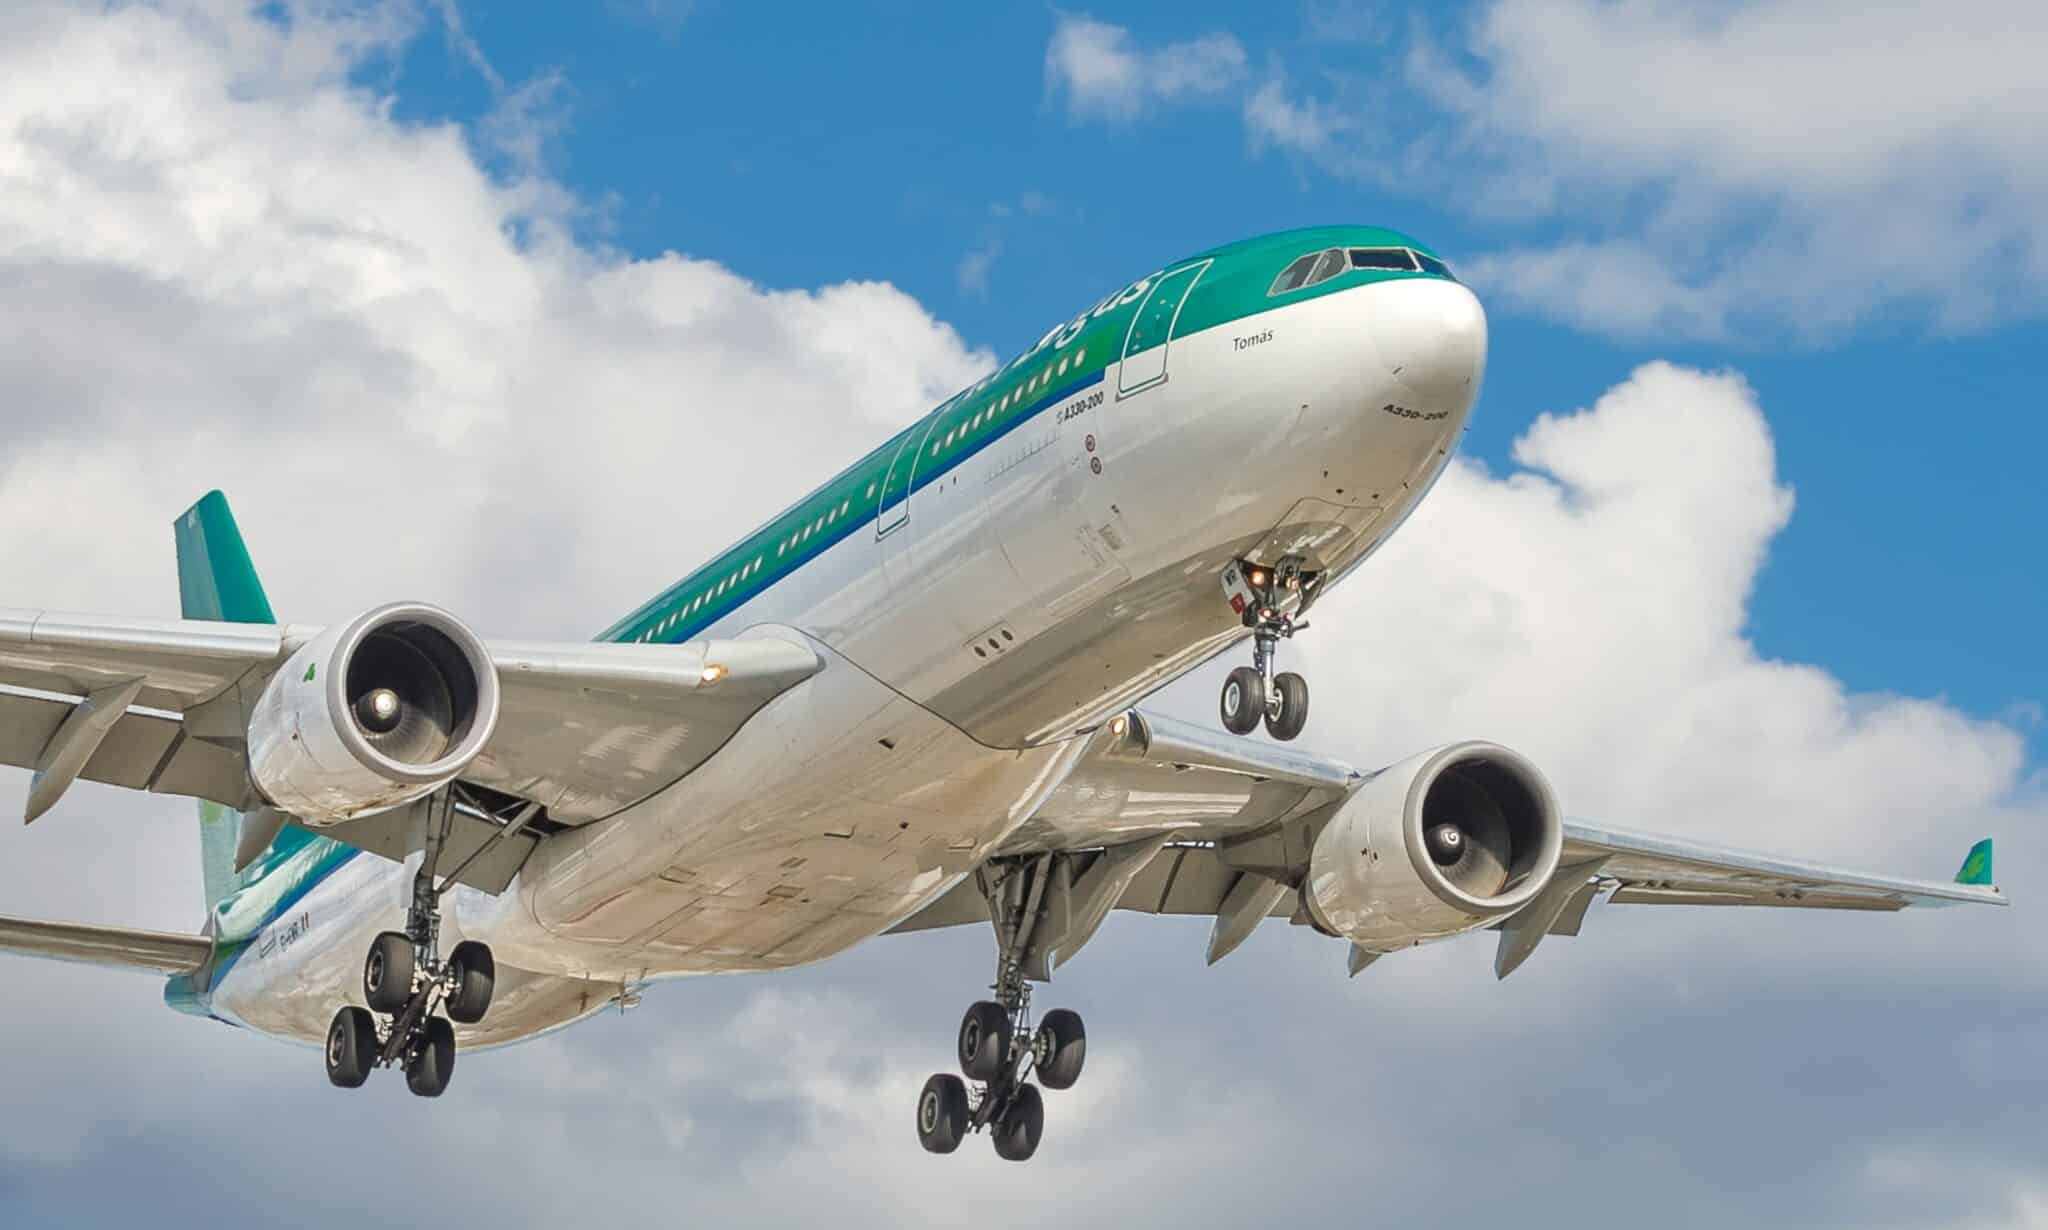 aer lingus a330 aircraft in flight